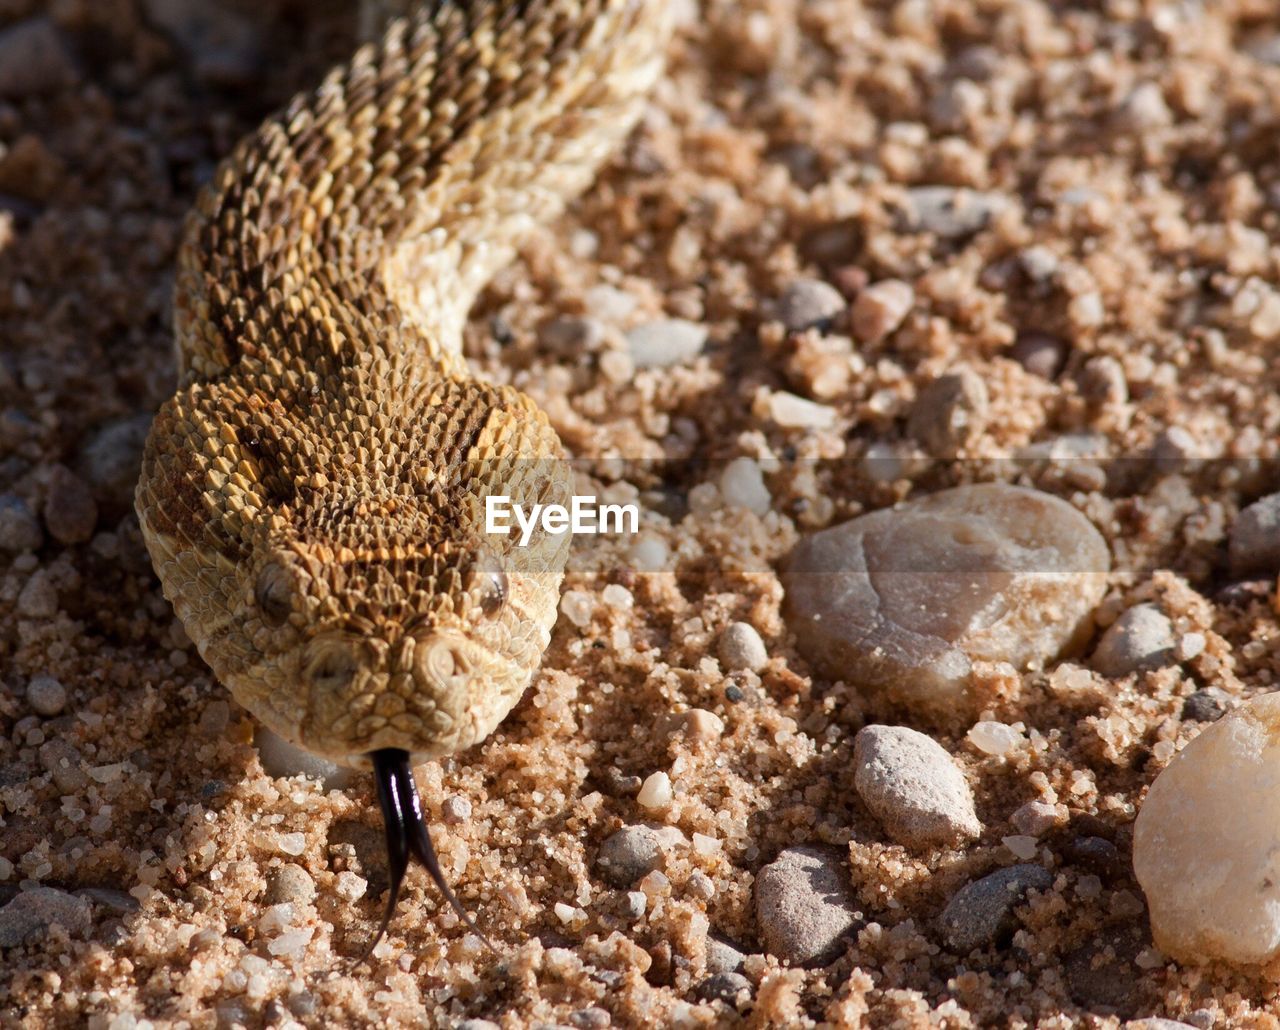 High angle view of puff adder snake